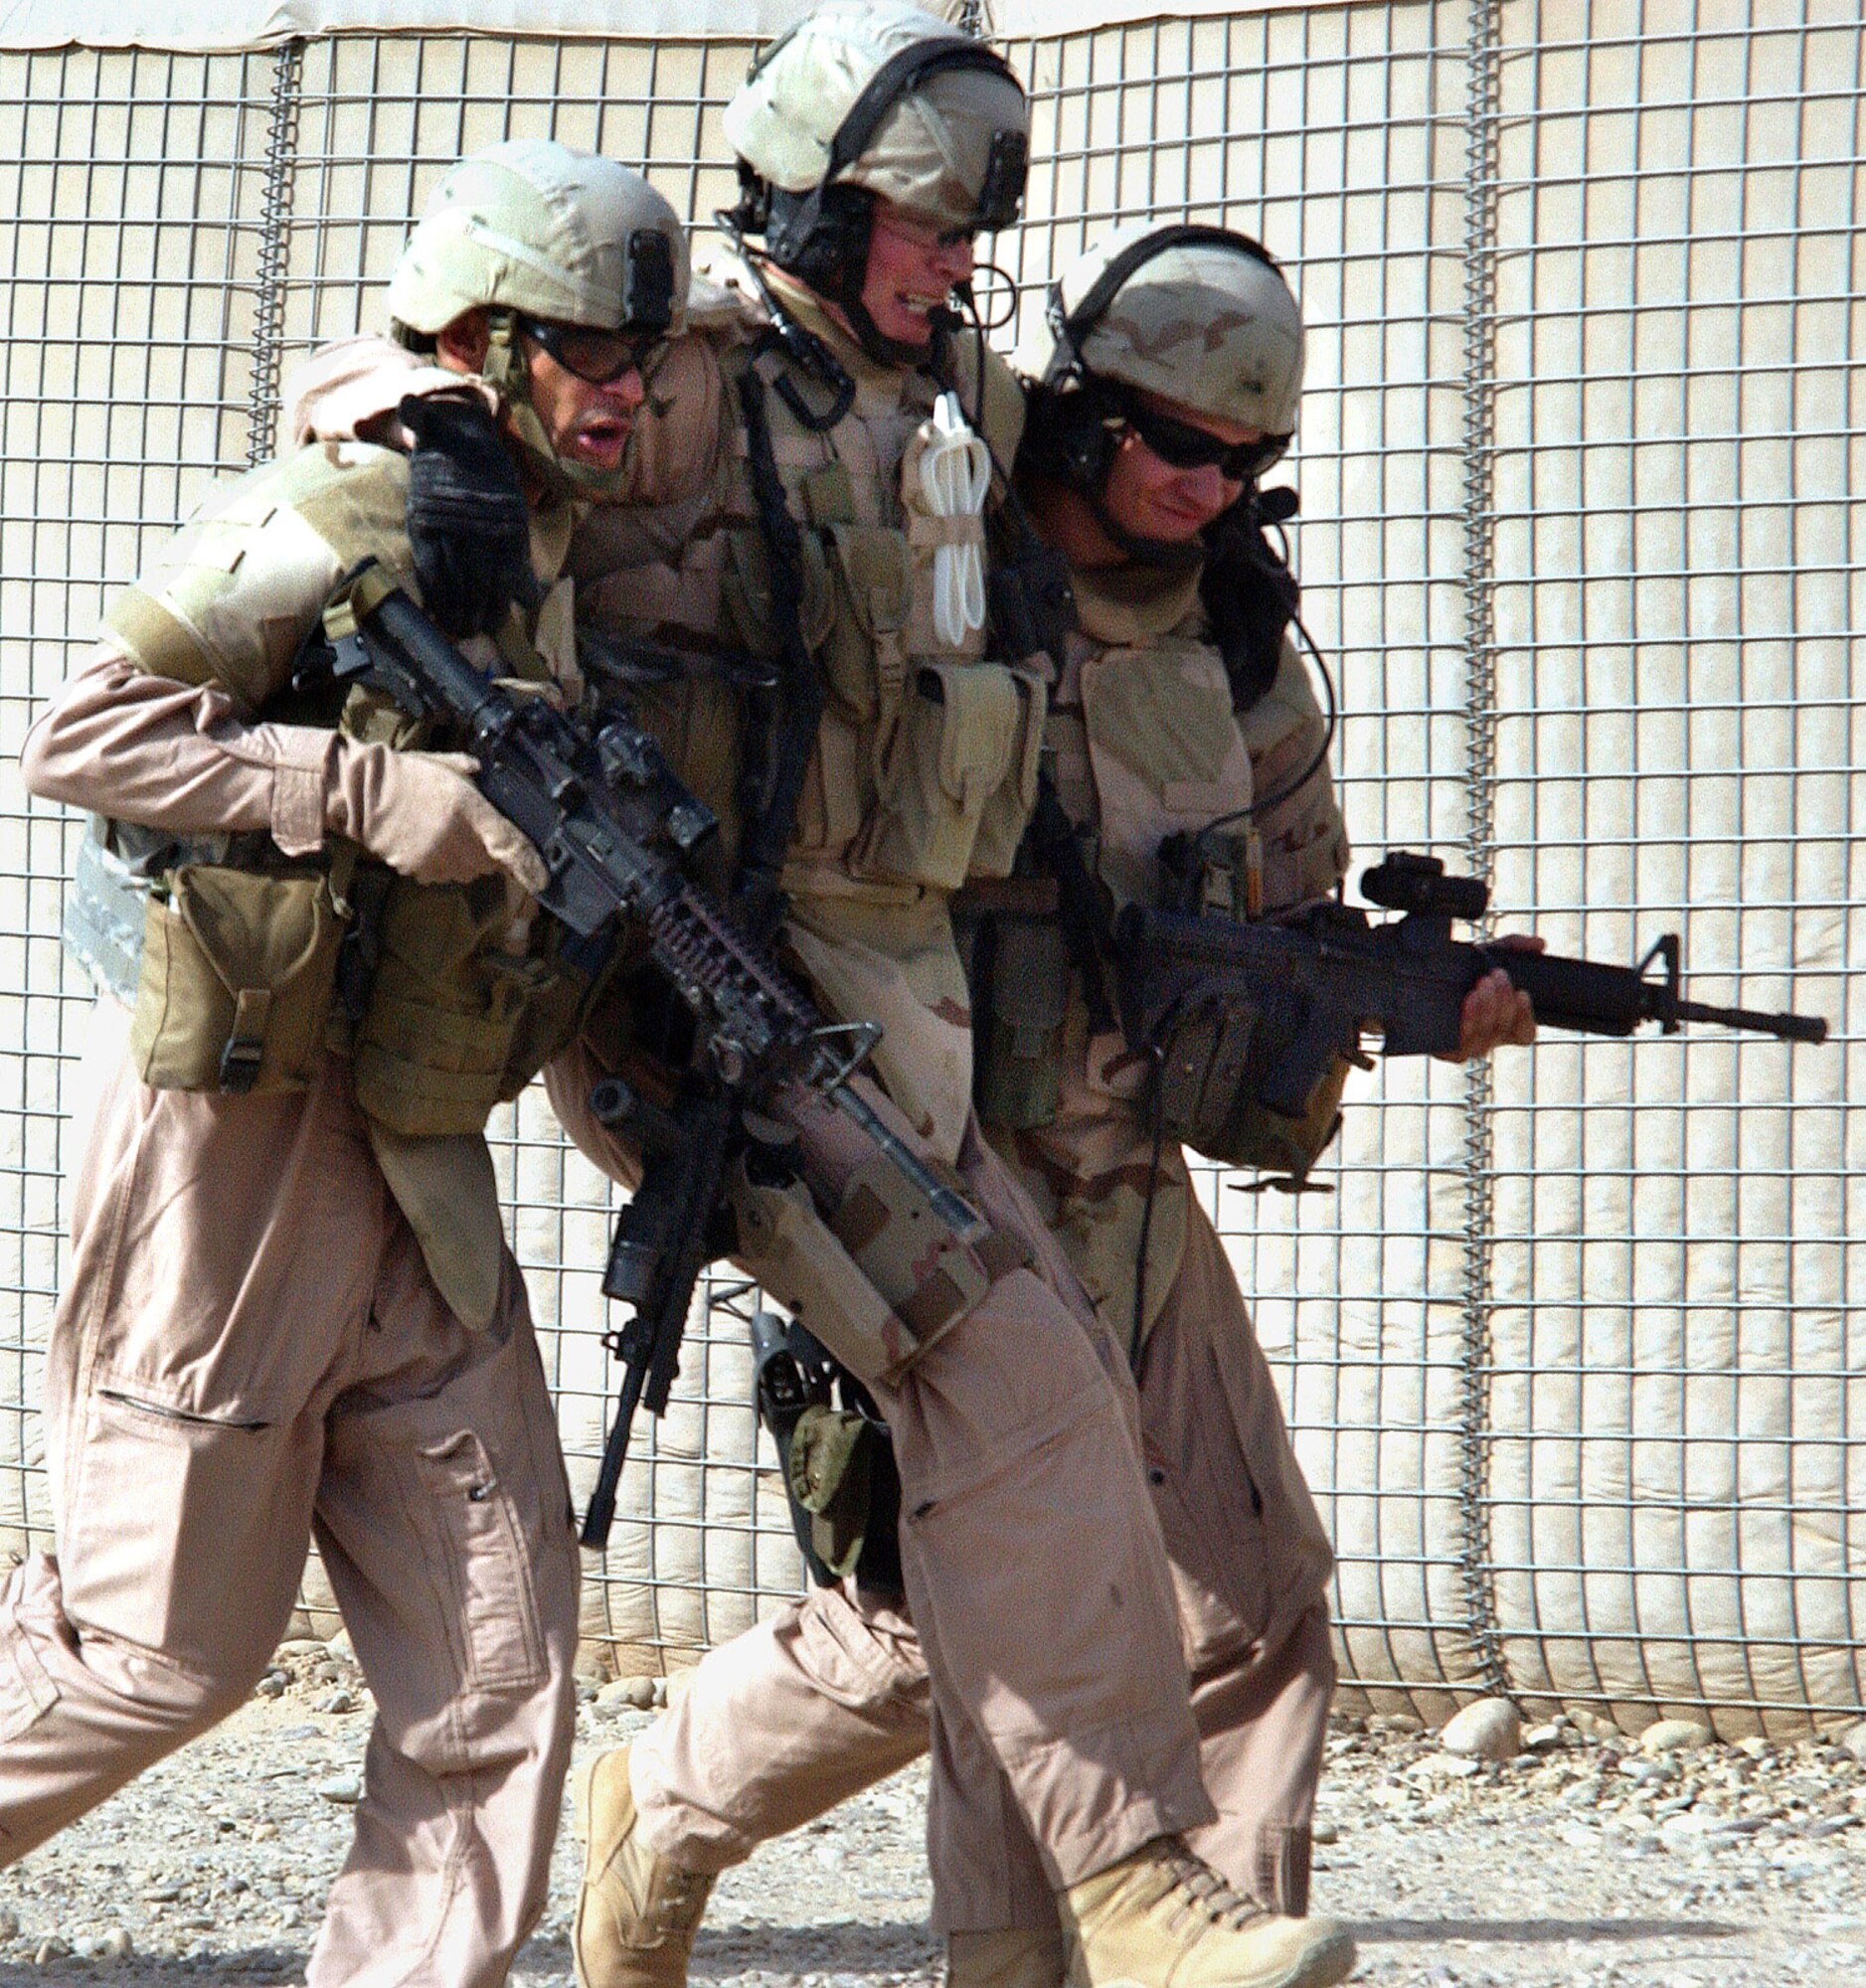 Master Sgt. Killjan Anderson (left) and Senior Airman John Bretzik, help an "injured" Staff Sgt. Dwayne Pyle back to waiting Humvees during "battle drills" performed before each mission at Contingency Operating Base Speicher, Iraq. All three are members of the 732nd Expeditionary Security Forces Squadron Det. 6 and perform duties as a Provincial Police Transition Team. The drills are designed to simulate any possible situation the team may encounter while conducting missions outside the wire. The PTTs goal is to help the Iraqis establish a functioning, independent police force. (U.S. Air Force photo/Master Sgt. Steve Horton)